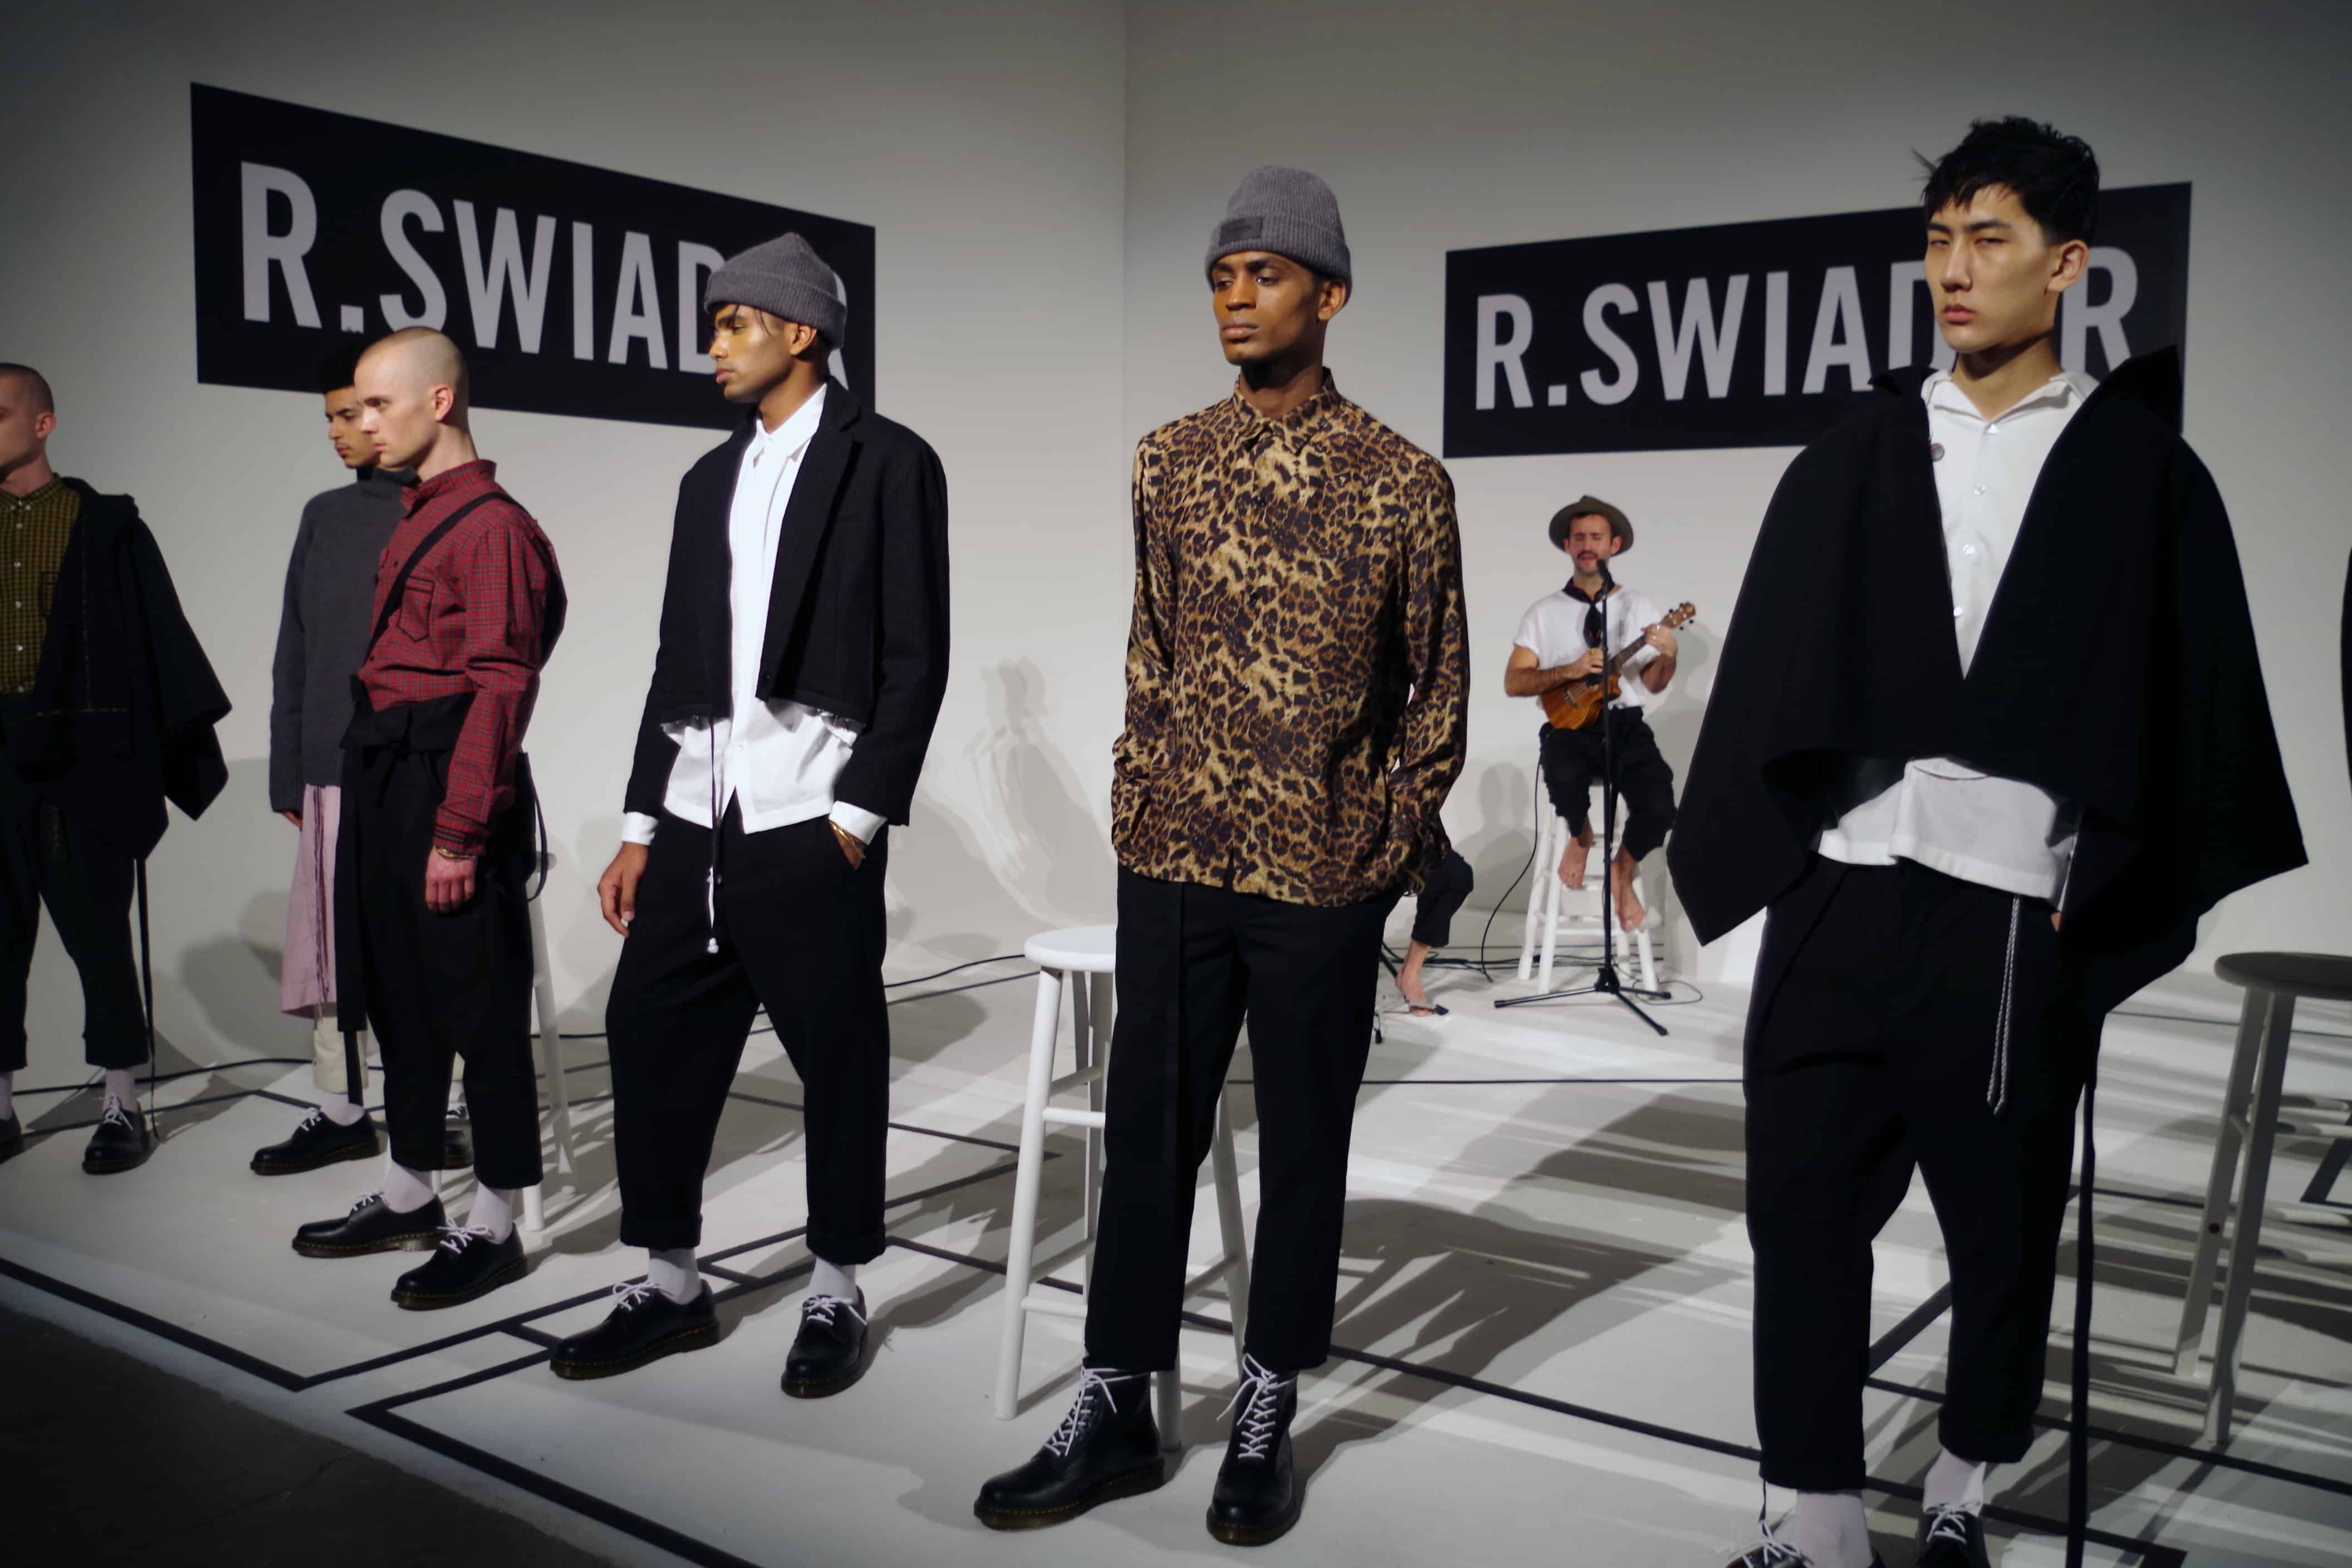 The mod punk looks from R.Swiader at Men's Fashion Week